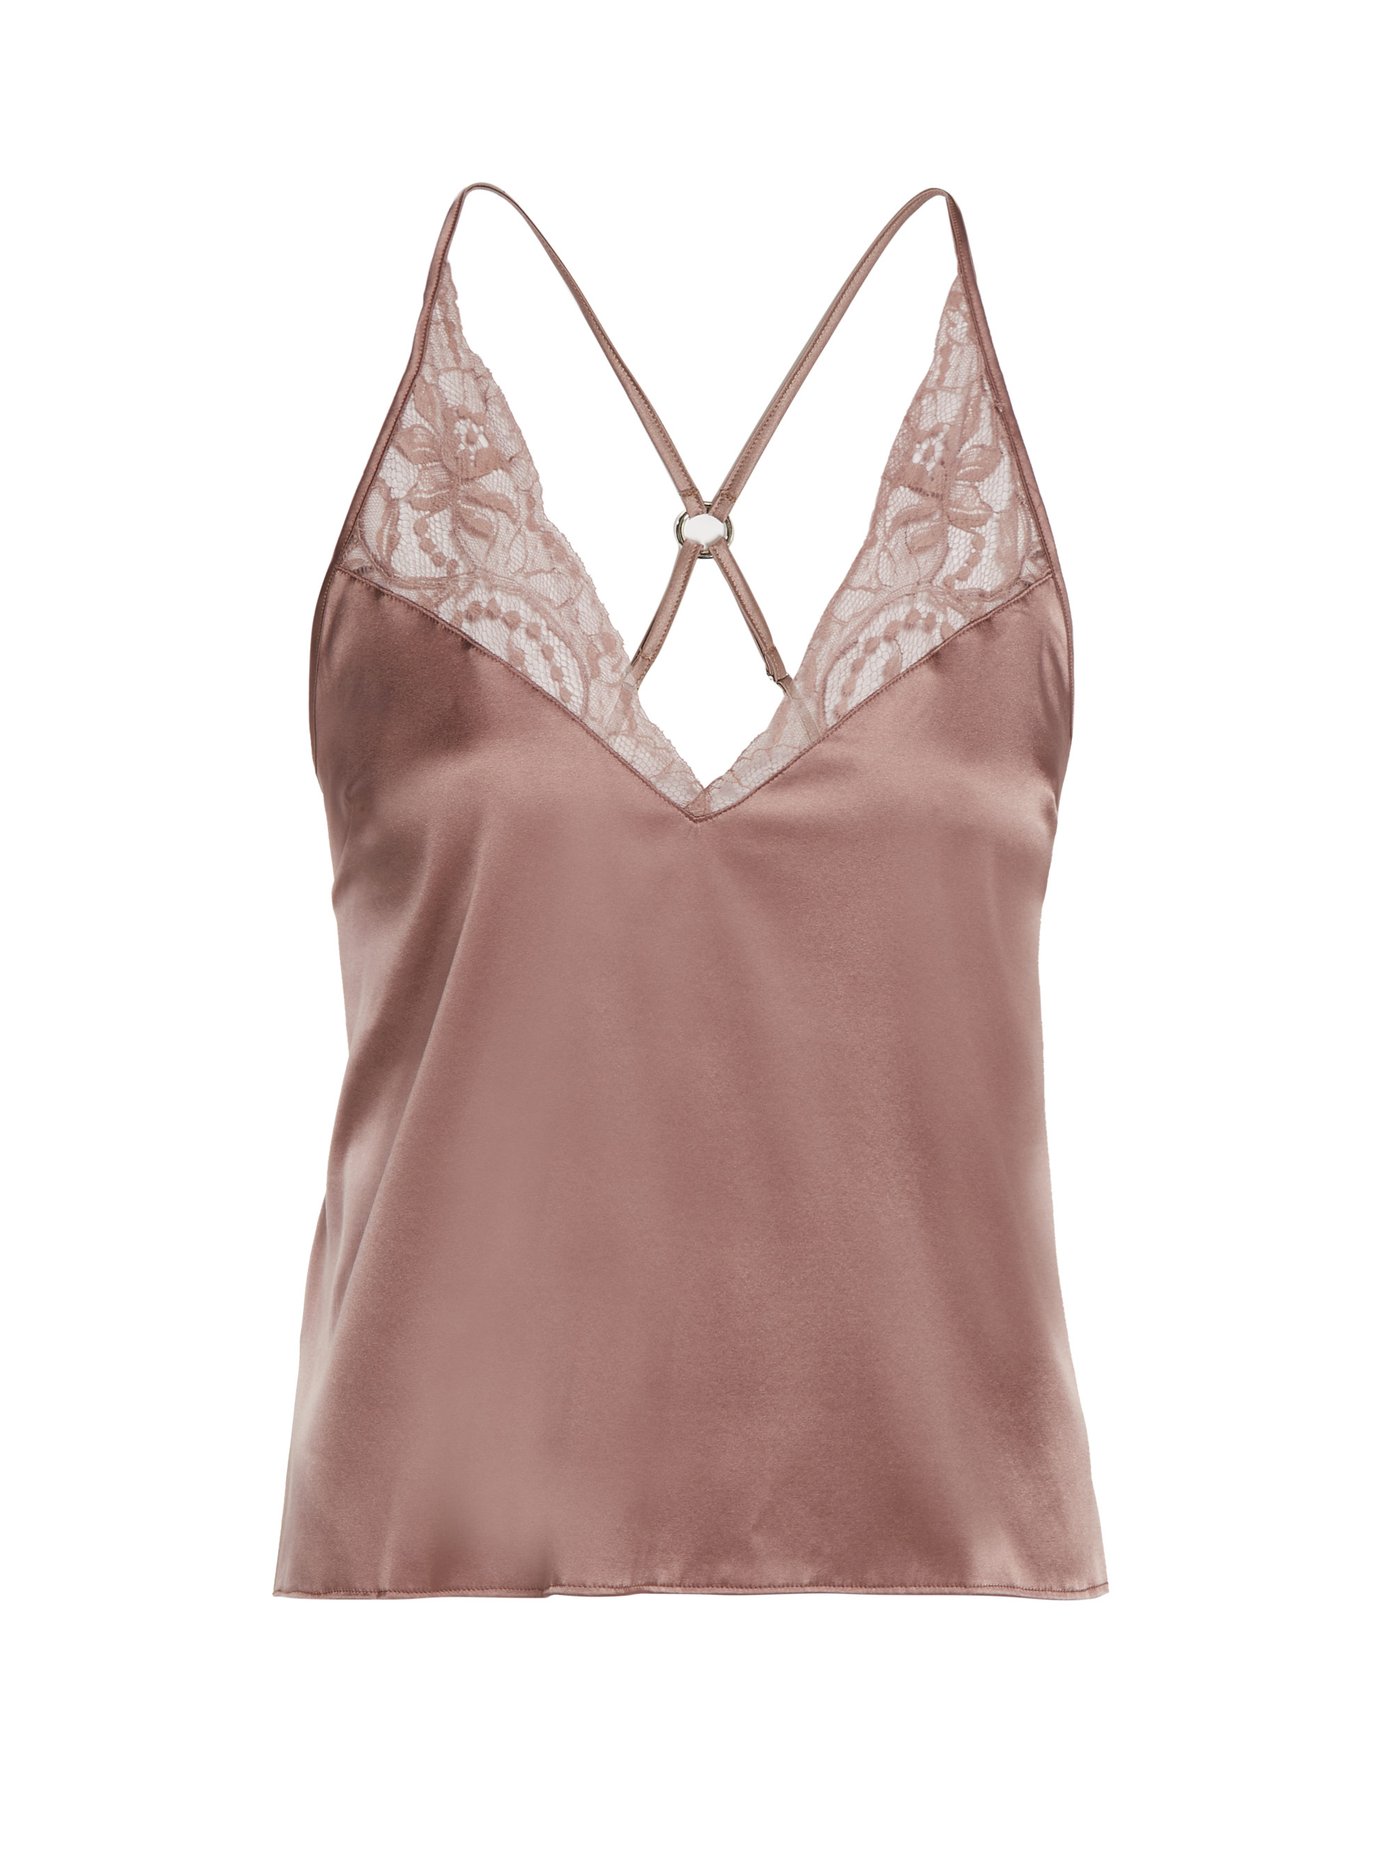 brown camisole top